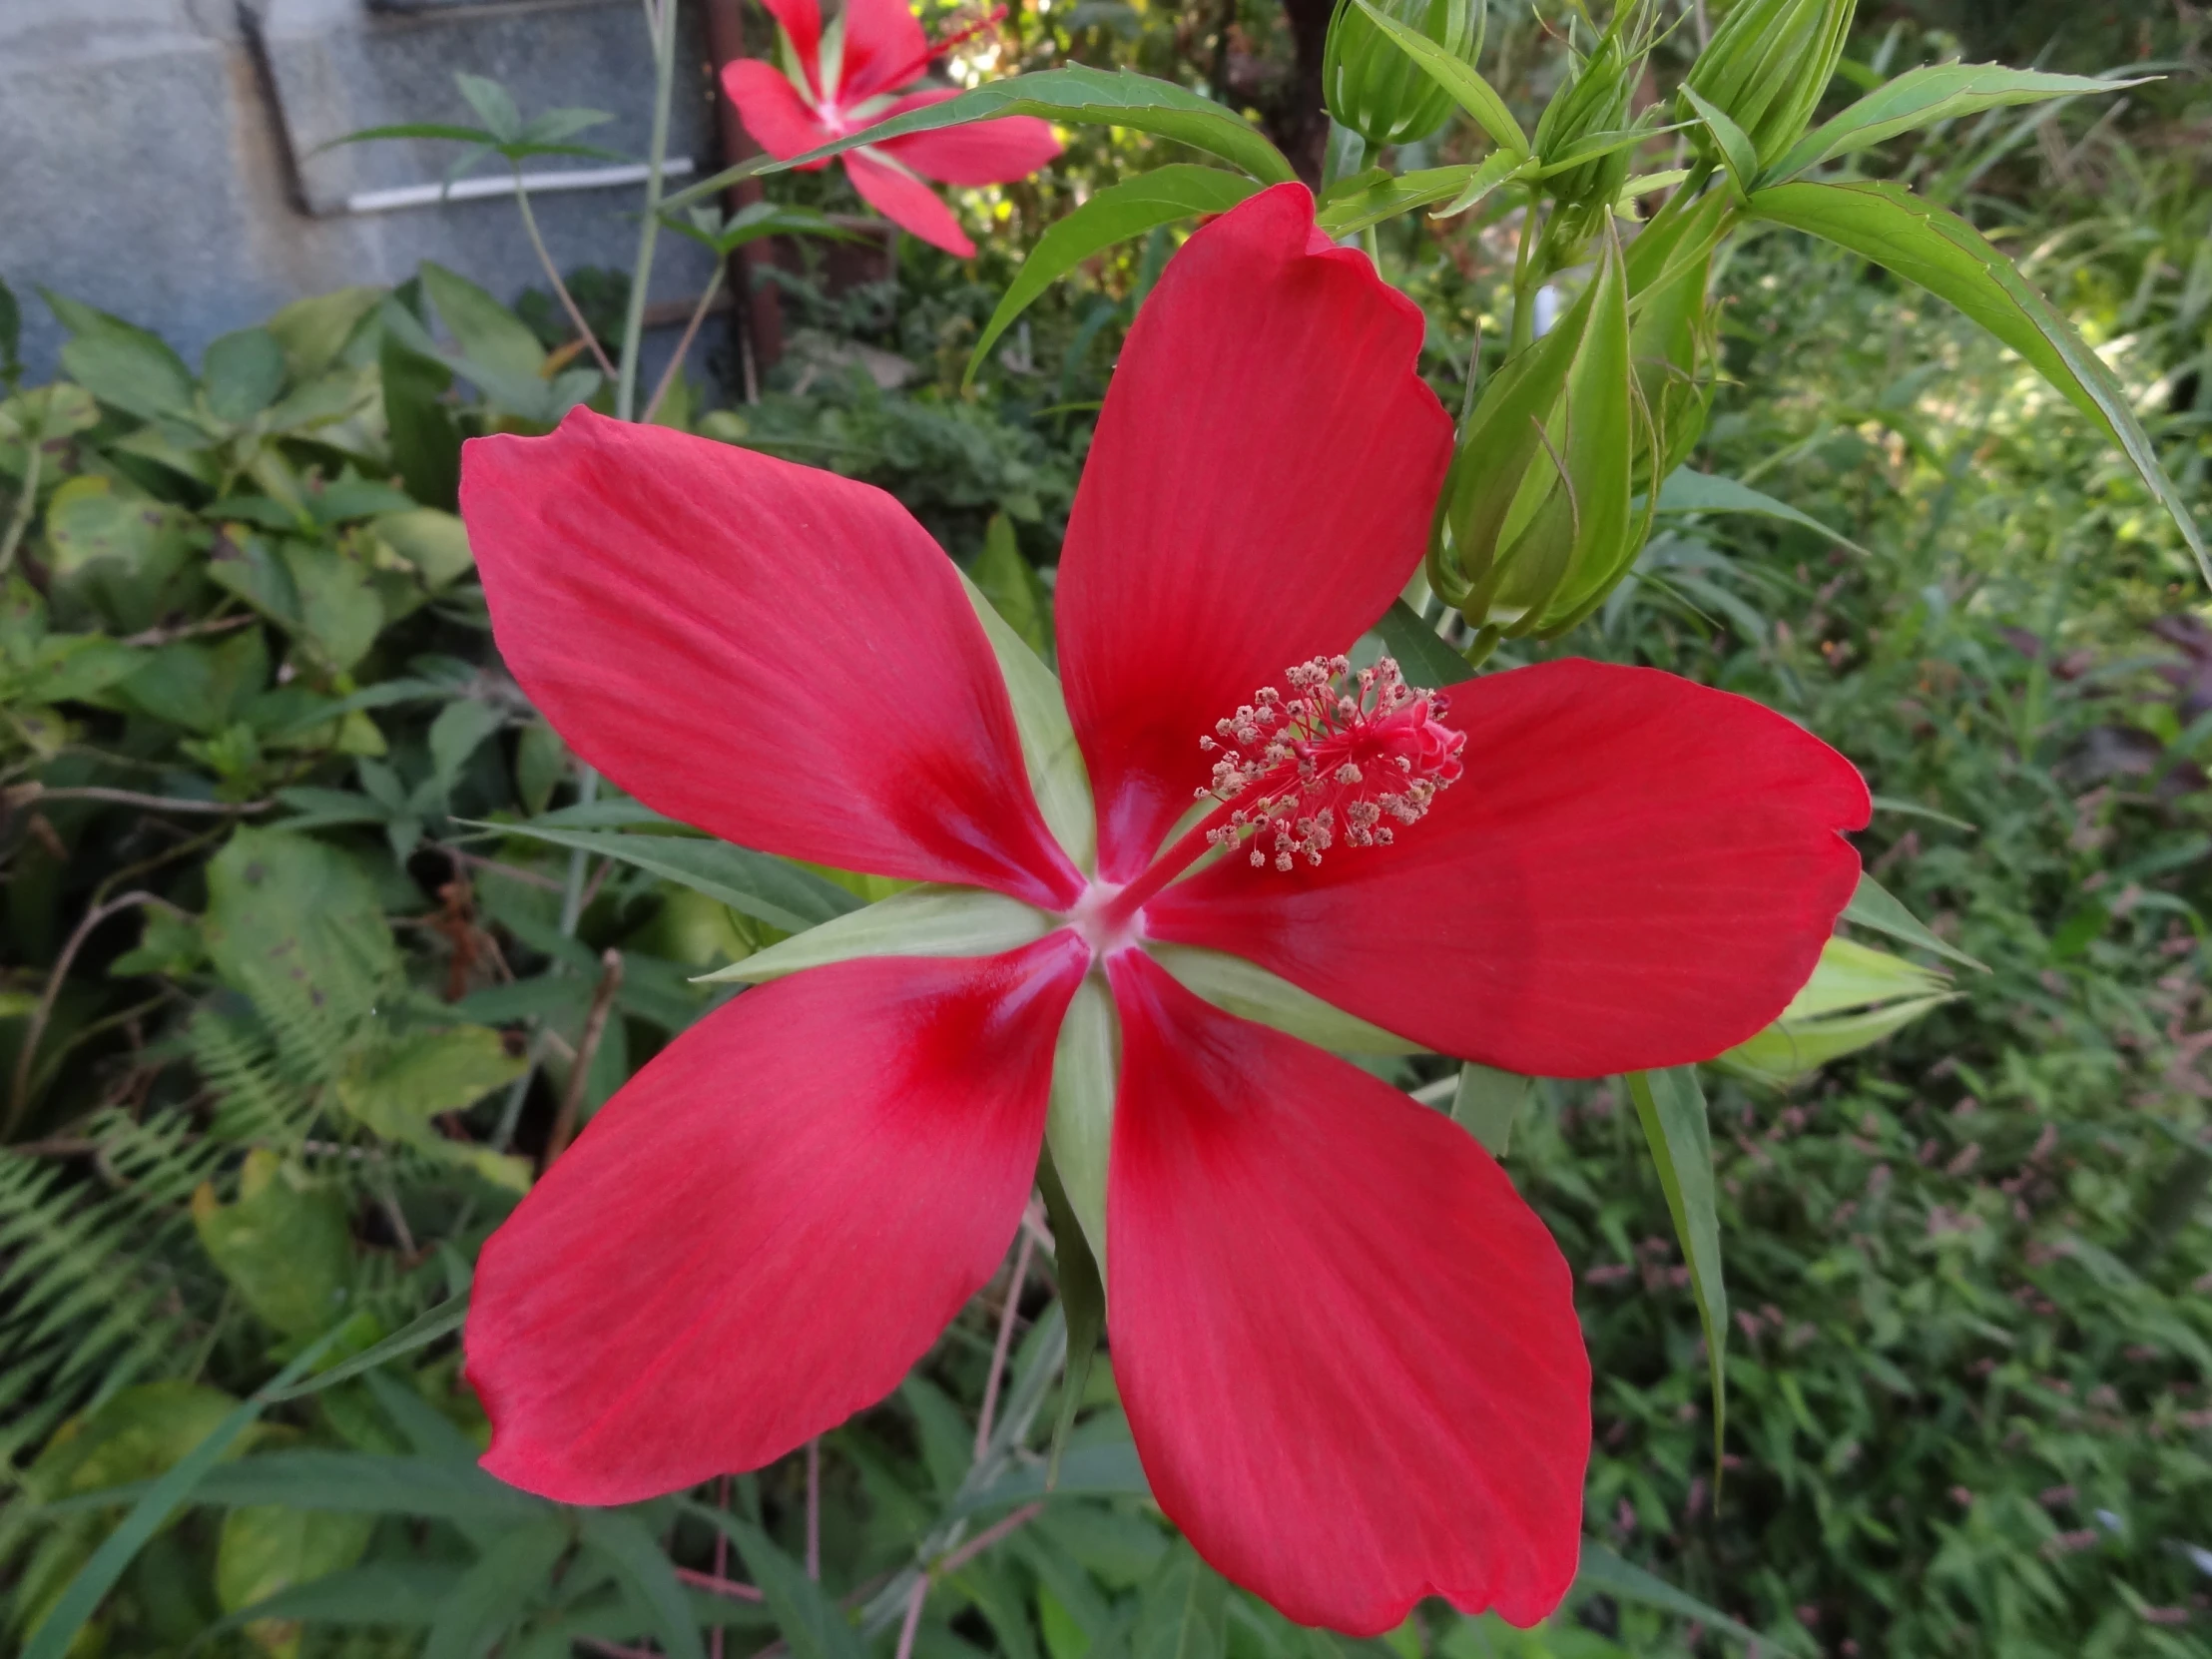 a red flower is in bloom in the middle of the garden